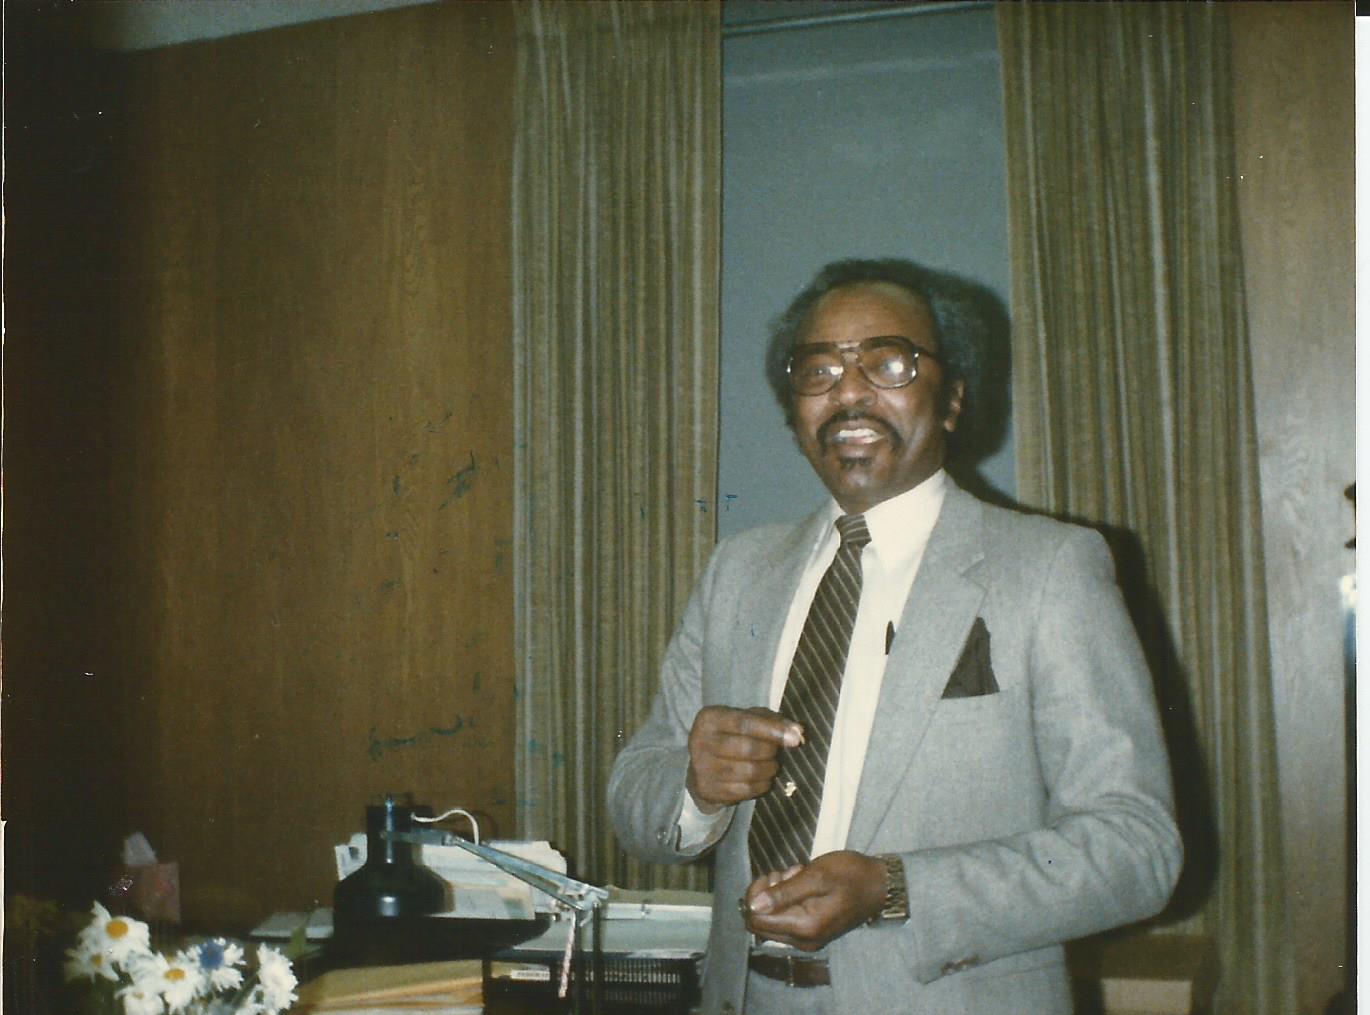 Old-looking photo of Judge Bonner smiling